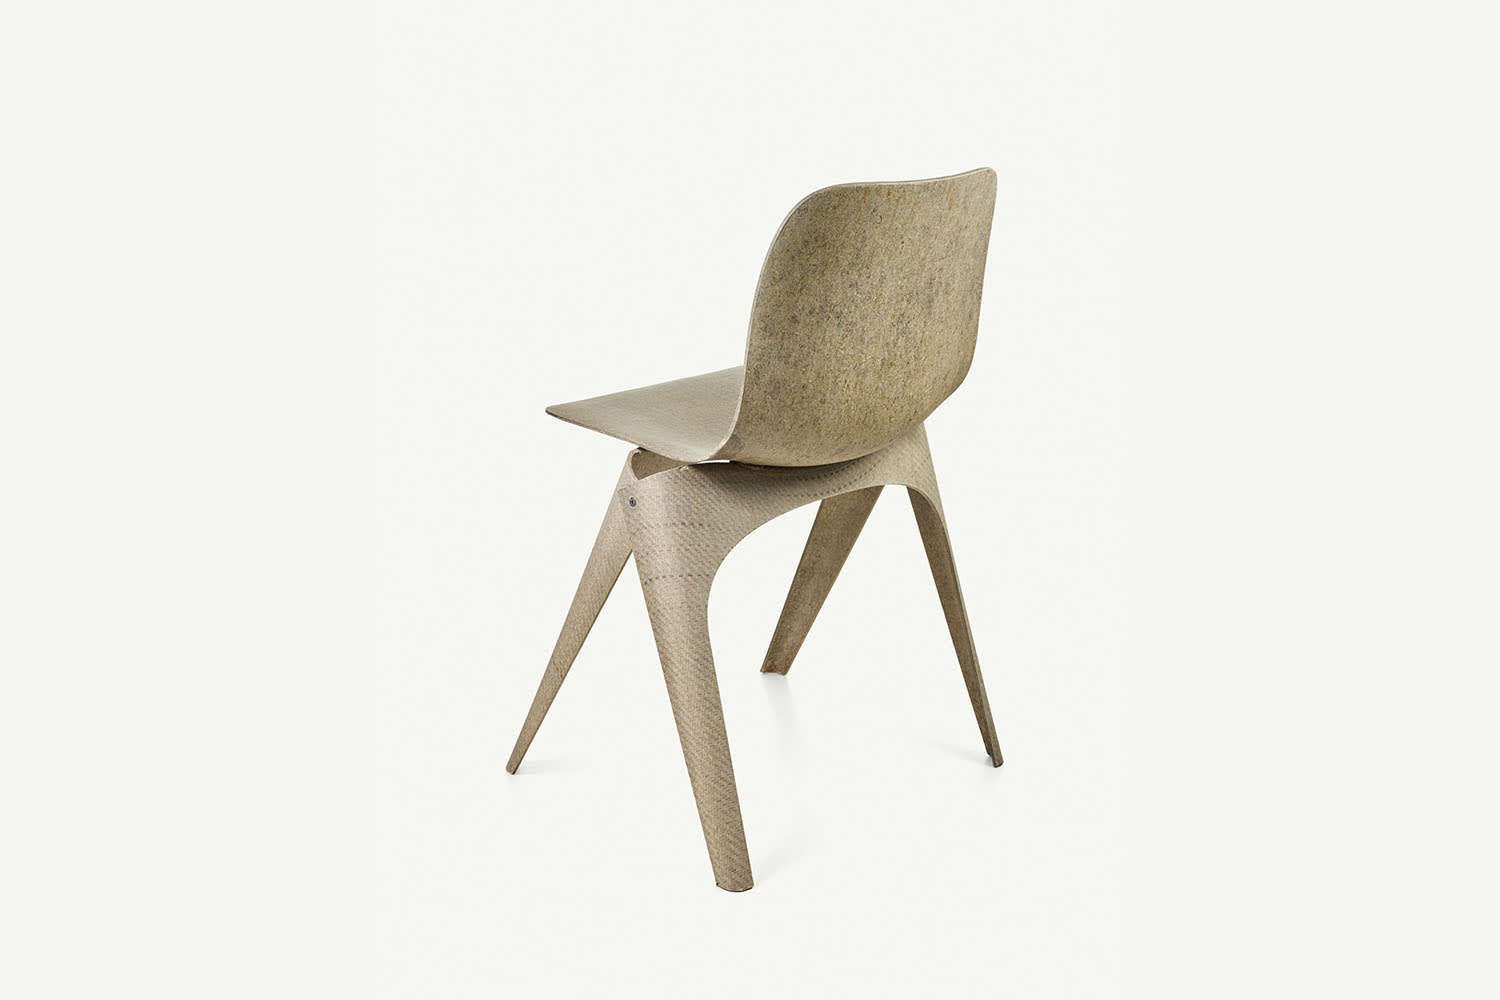 Initiated by Label/Breed, Meindertsma collaborated with natural fibre specialist Enkev to develop a new four layer composite of woven and dry-needle felted flax that could be made into rigid products such as this Flax Chair, 2015.